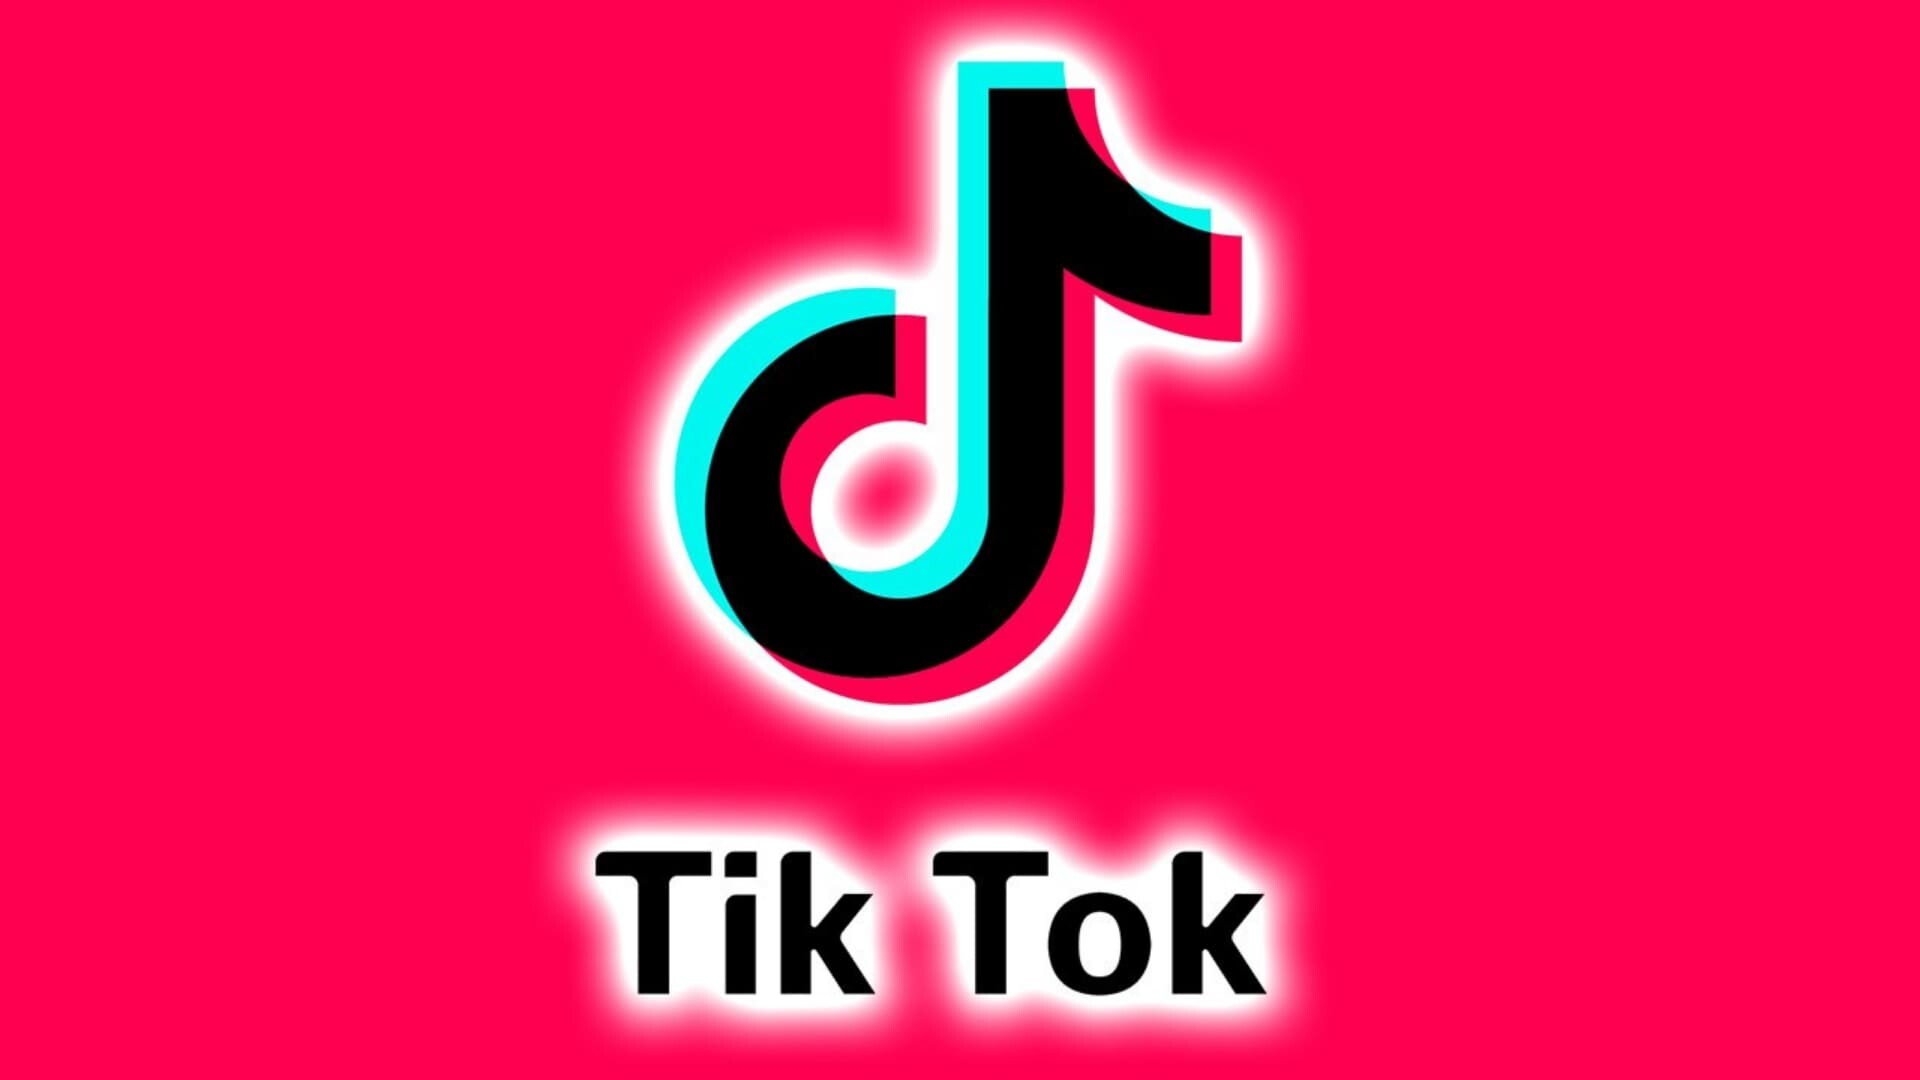 TikTok: The app, Launched by ByteDance for markets outside of China, 2017. 1920x1080 Full HD Wallpaper.